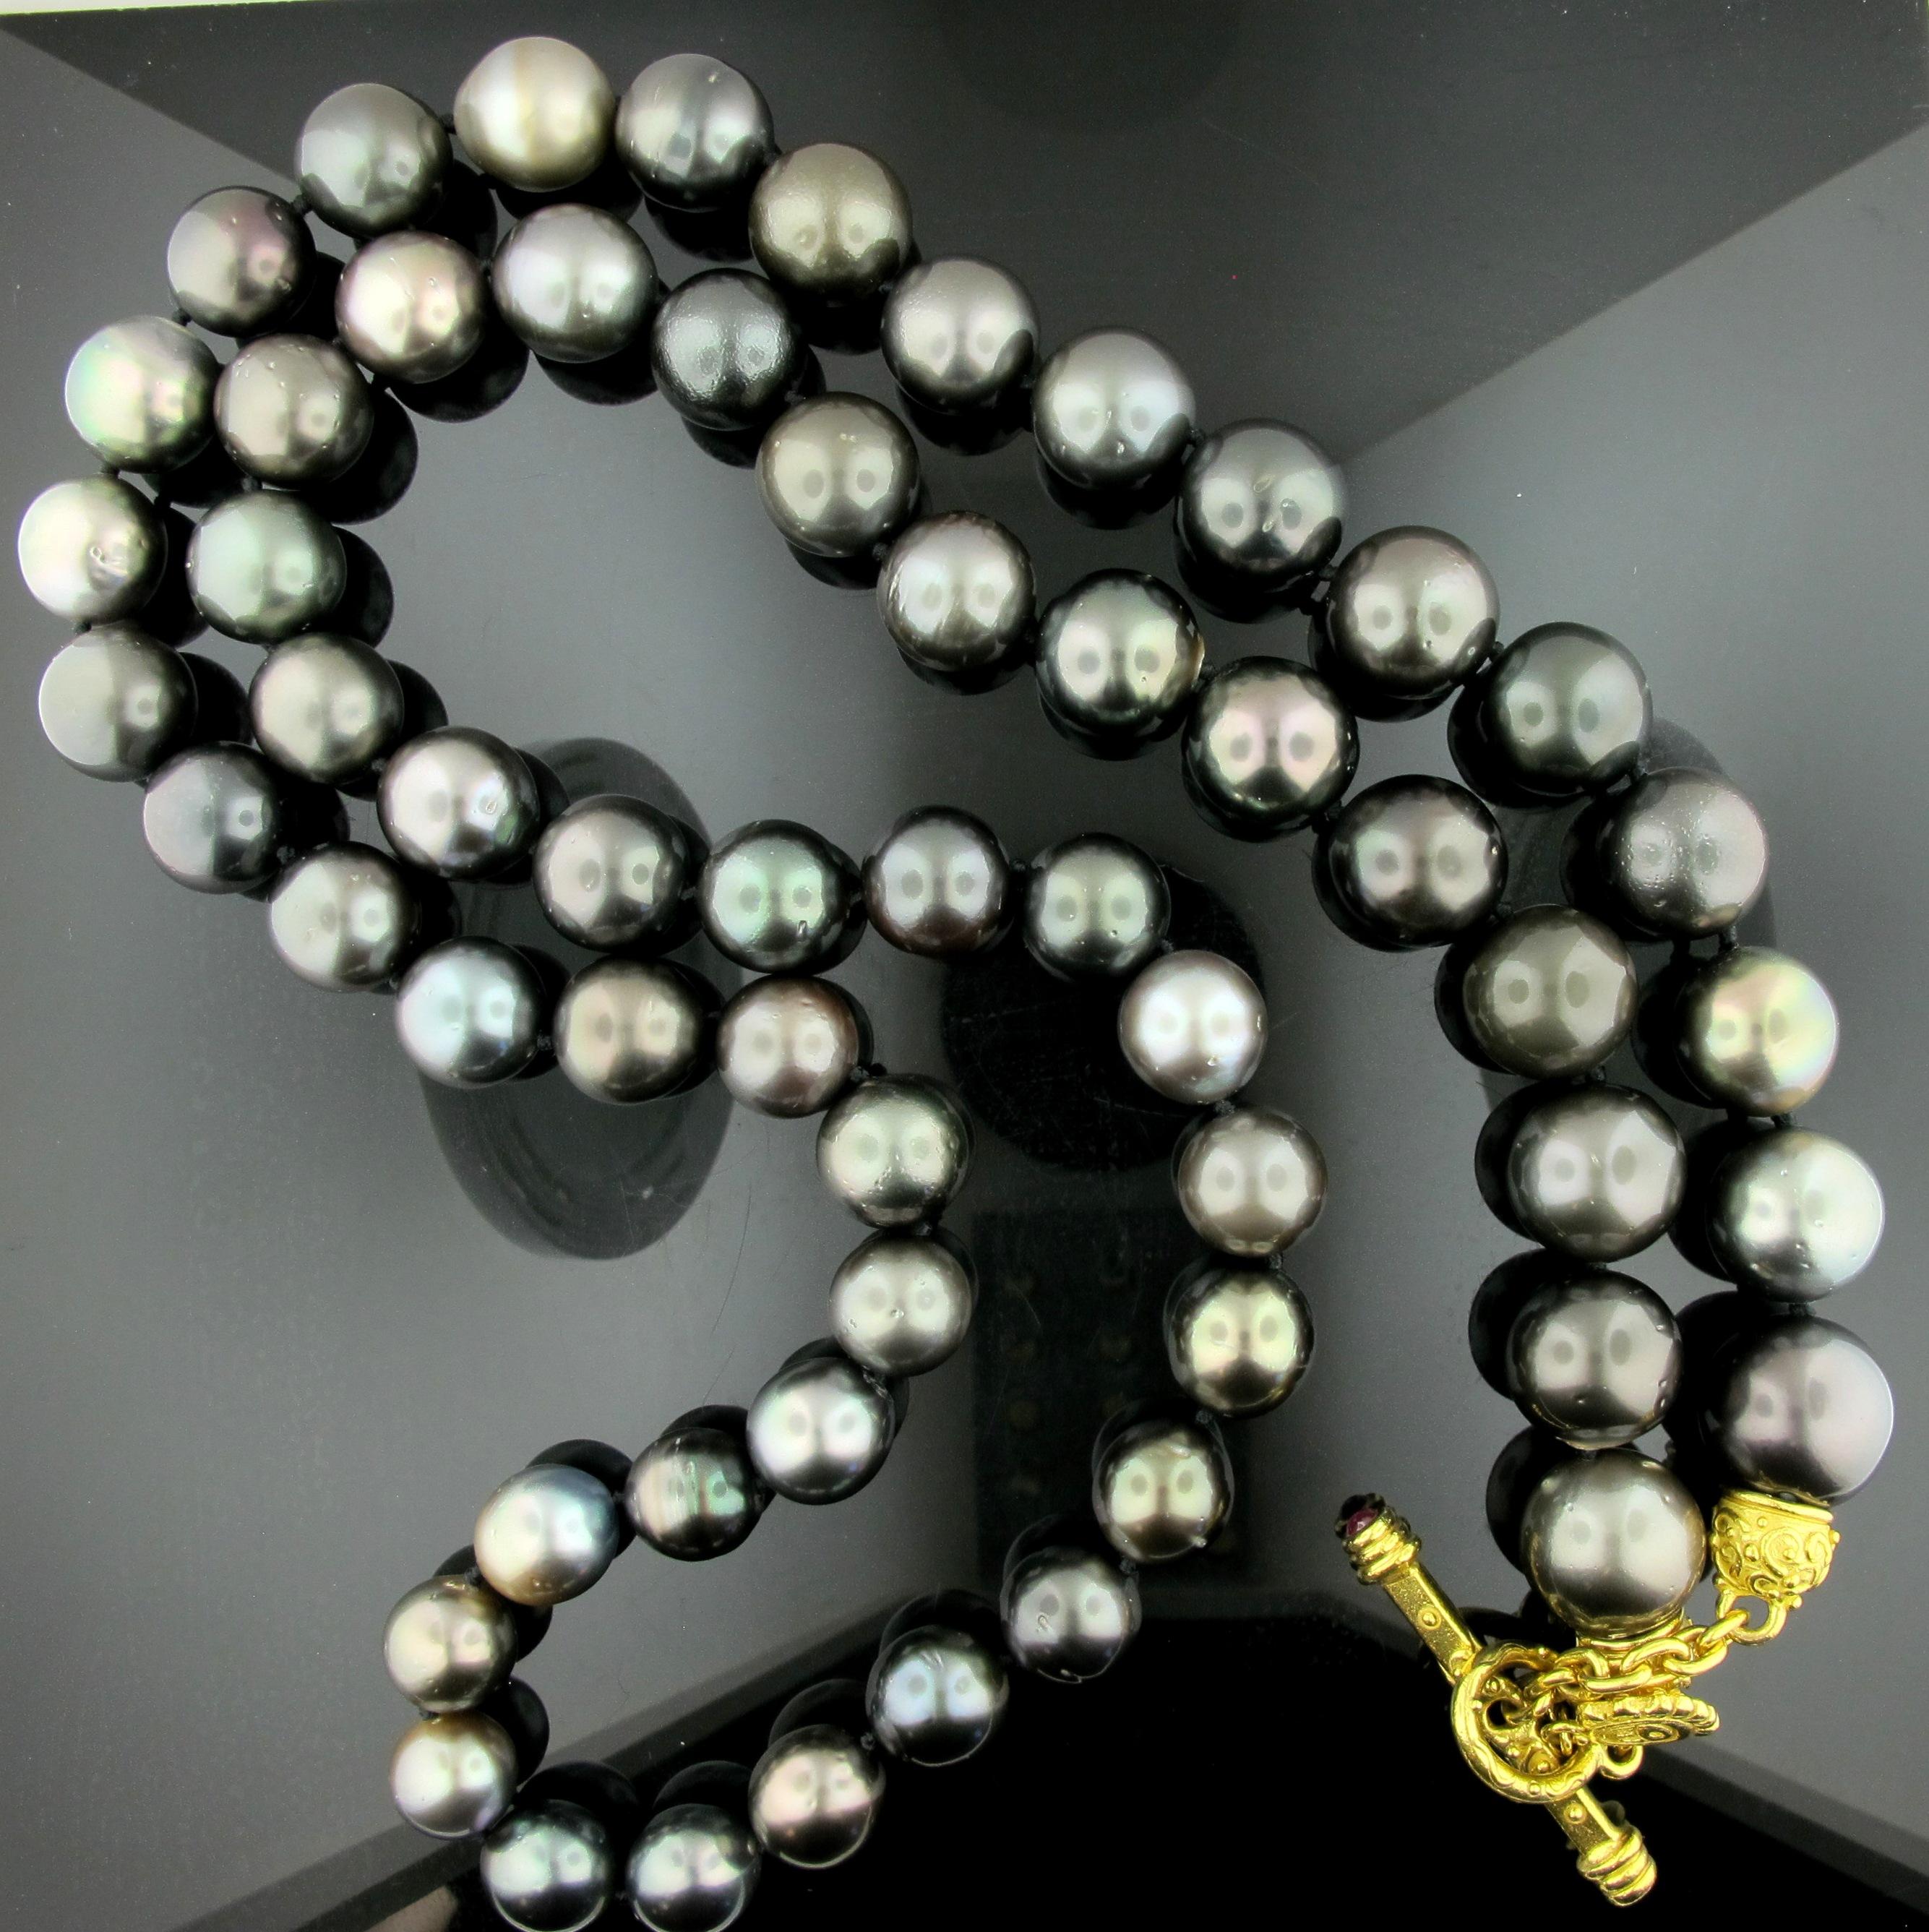 Signed Denise Roberge Pearl Necklace. 58 Tahitian Pearls with a signature 22 karat yellow gold toggle clasp.  Pearls are 11mm - 16mm.  Length is 17